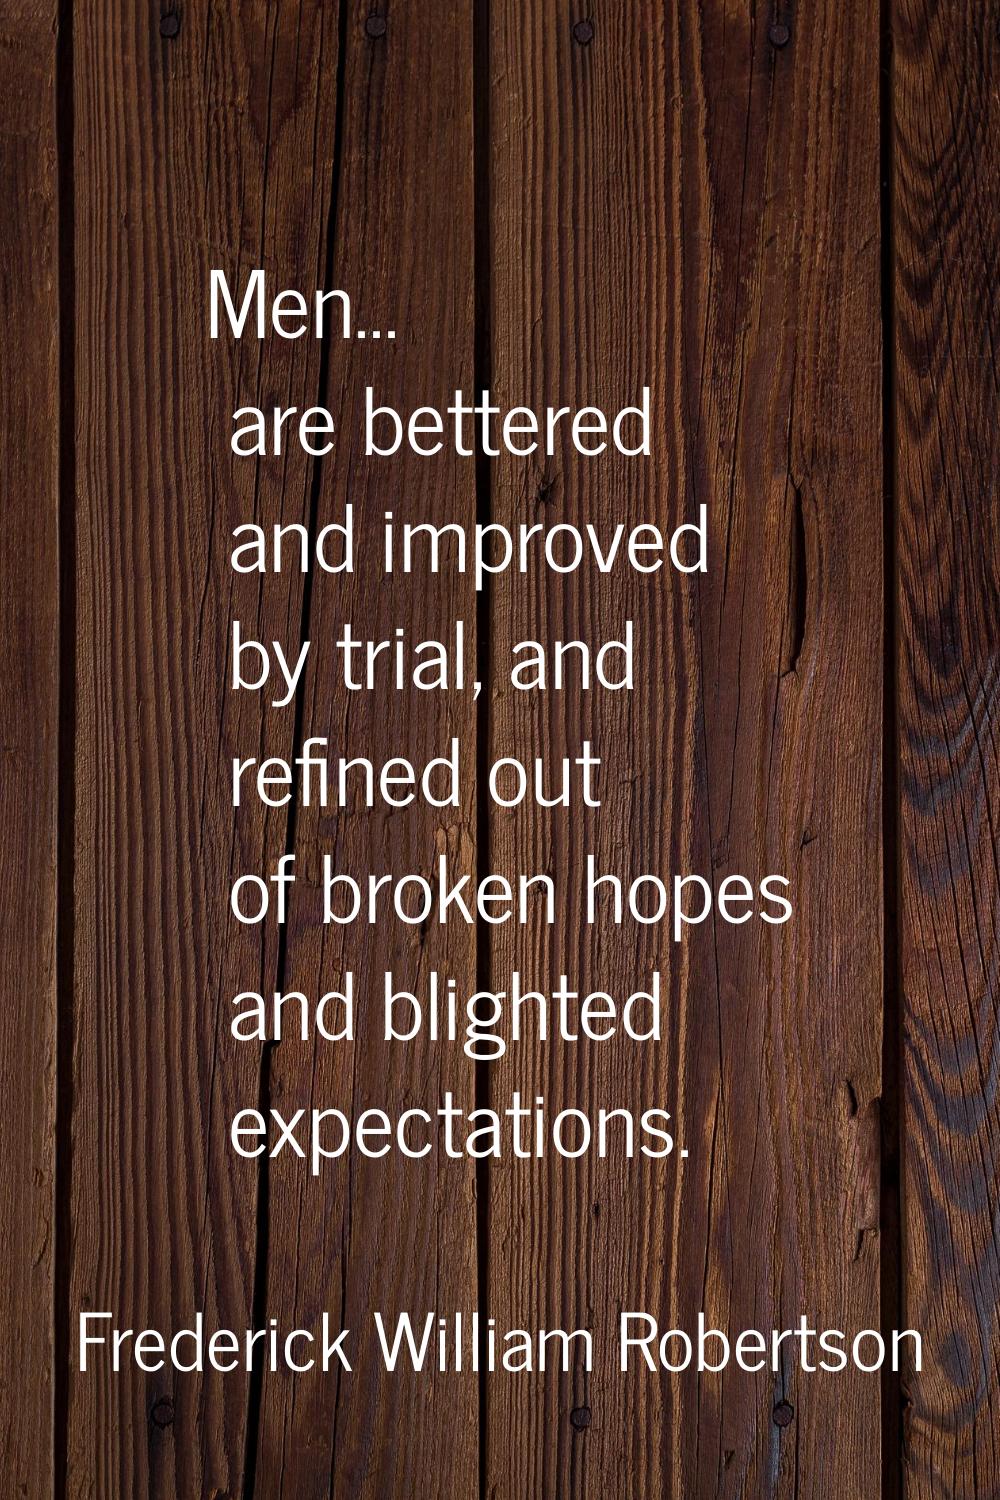 Men... are bettered and improved by trial, and refined out of broken hopes and blighted expectation